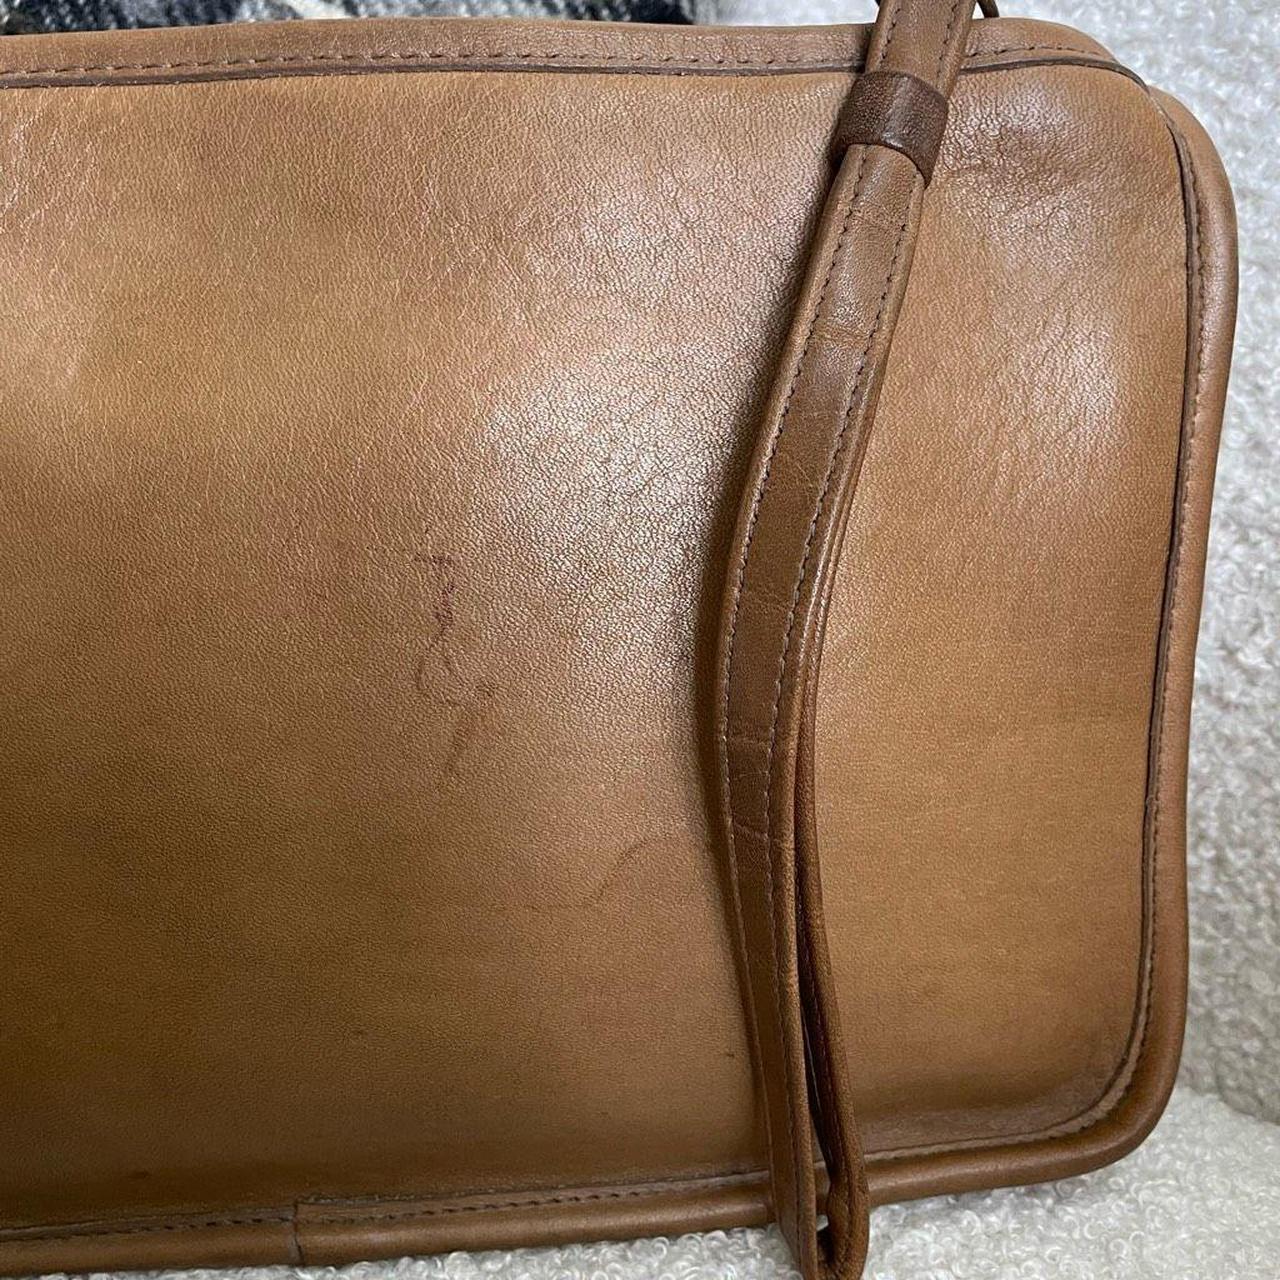 Circa 2017 Coach brown leather briefcase. Never used - Depop